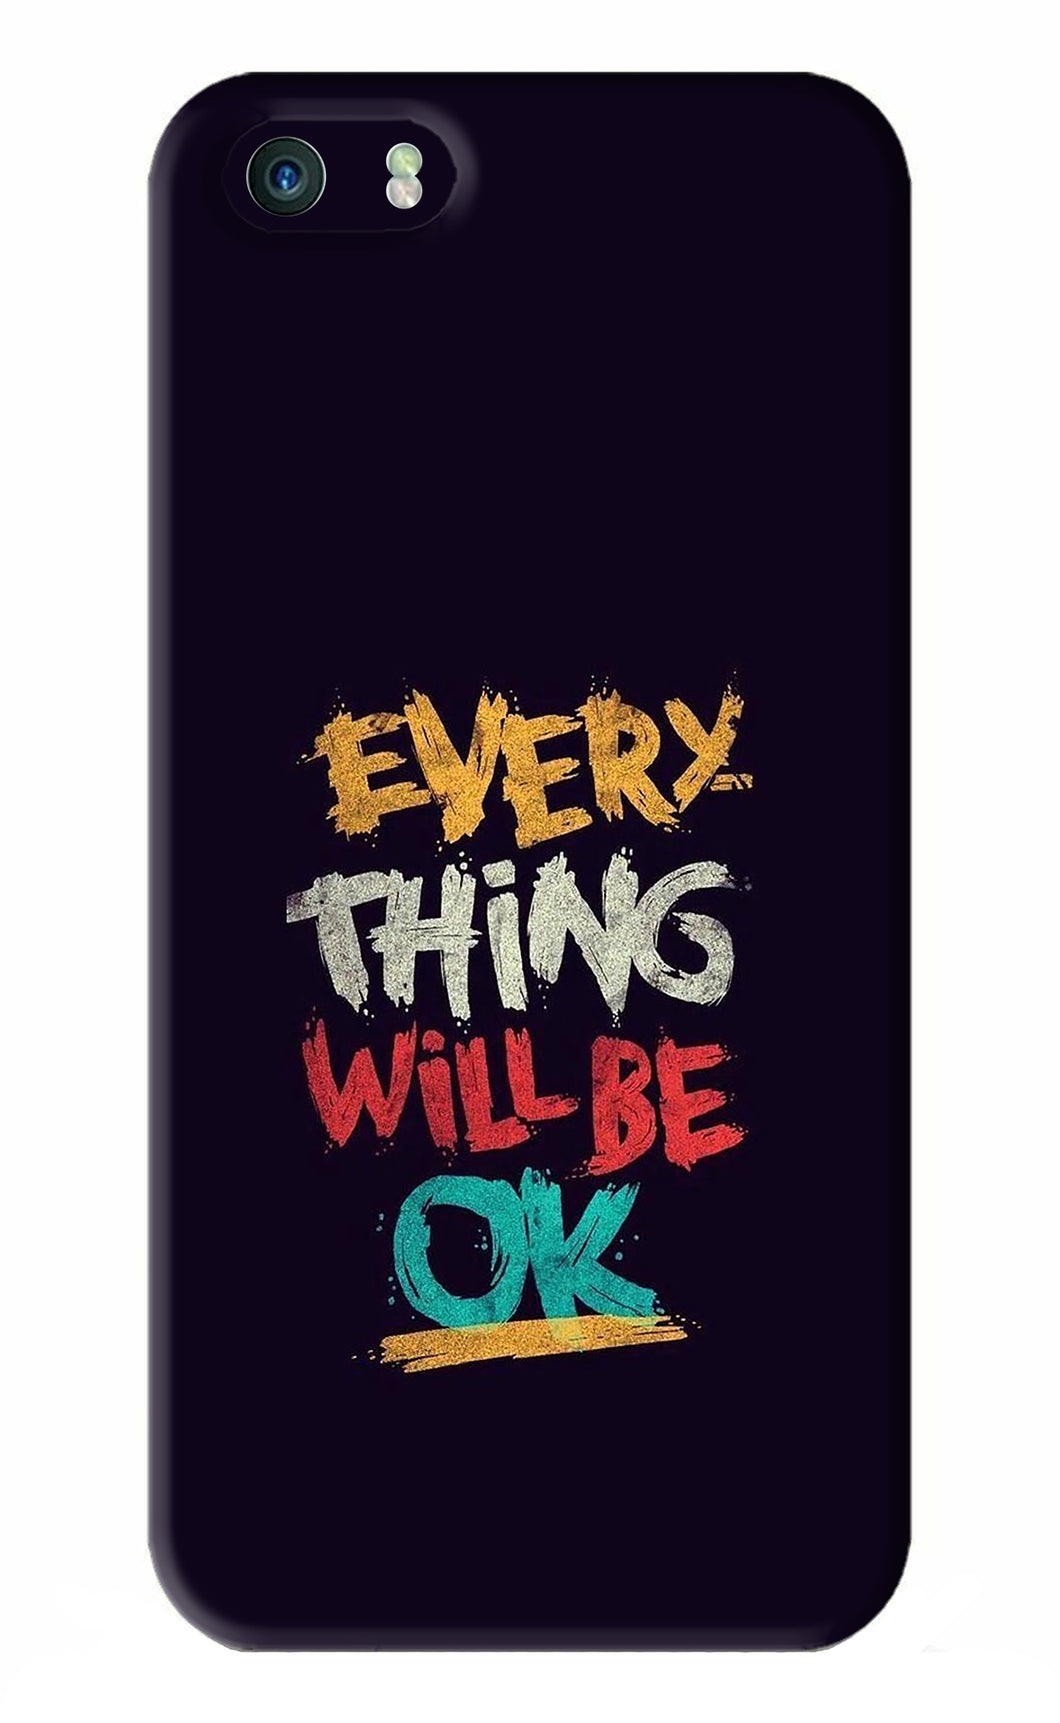 Everything Will Be Ok iPhone 5 Back Skin Wrap